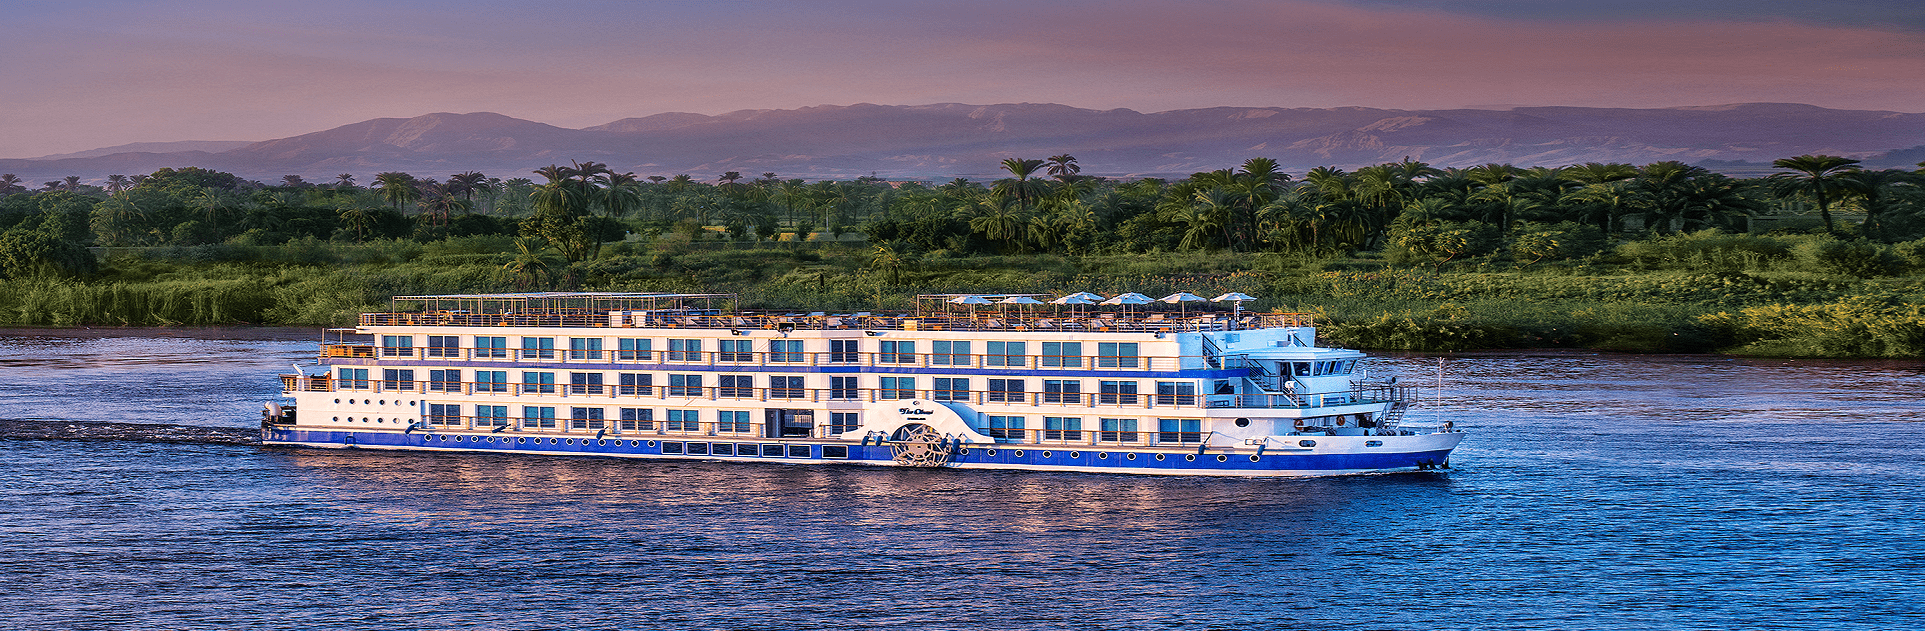 Our Nile Cruise packages